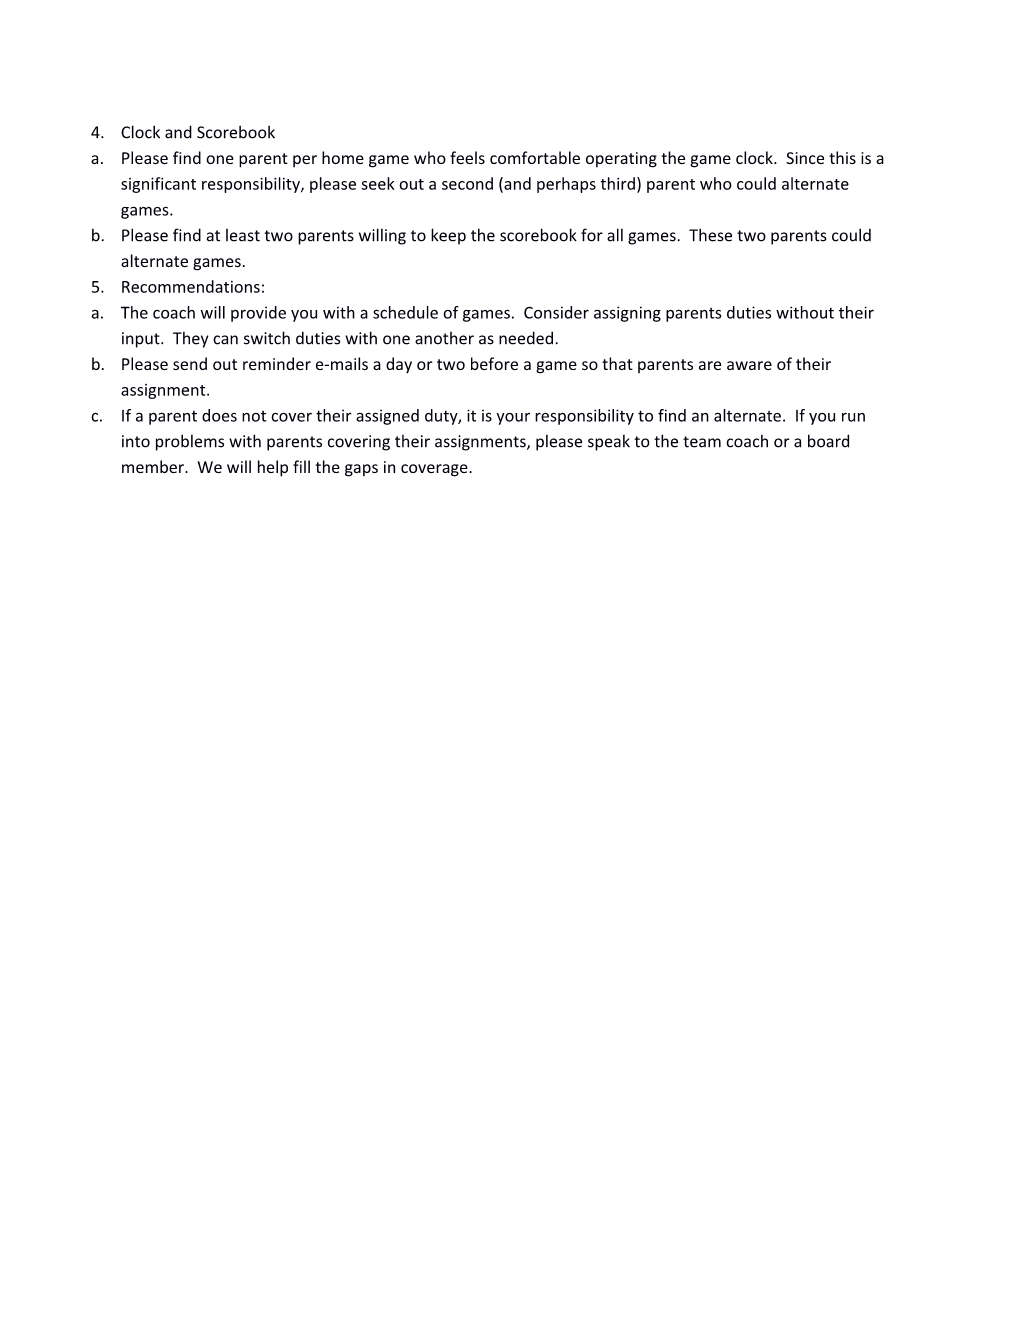 CYO Team Parent Guidelines